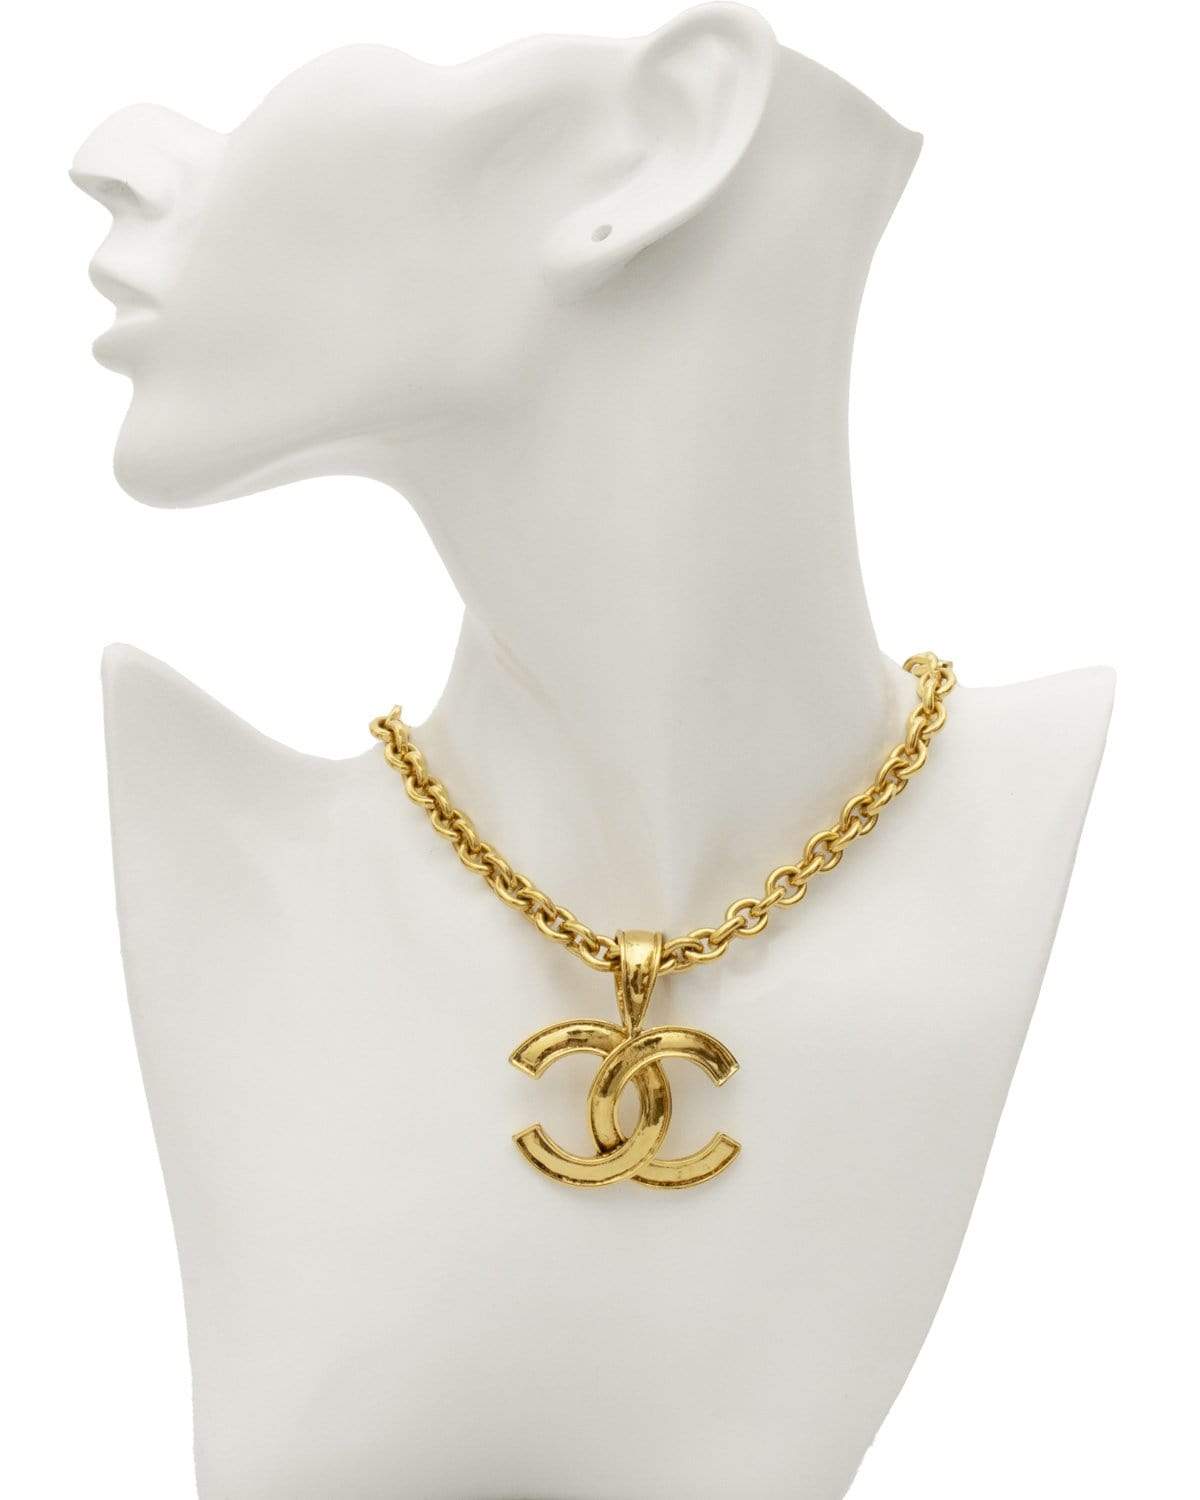 Vintage CHANEL gold chain necklace with large CC mark logo pendant